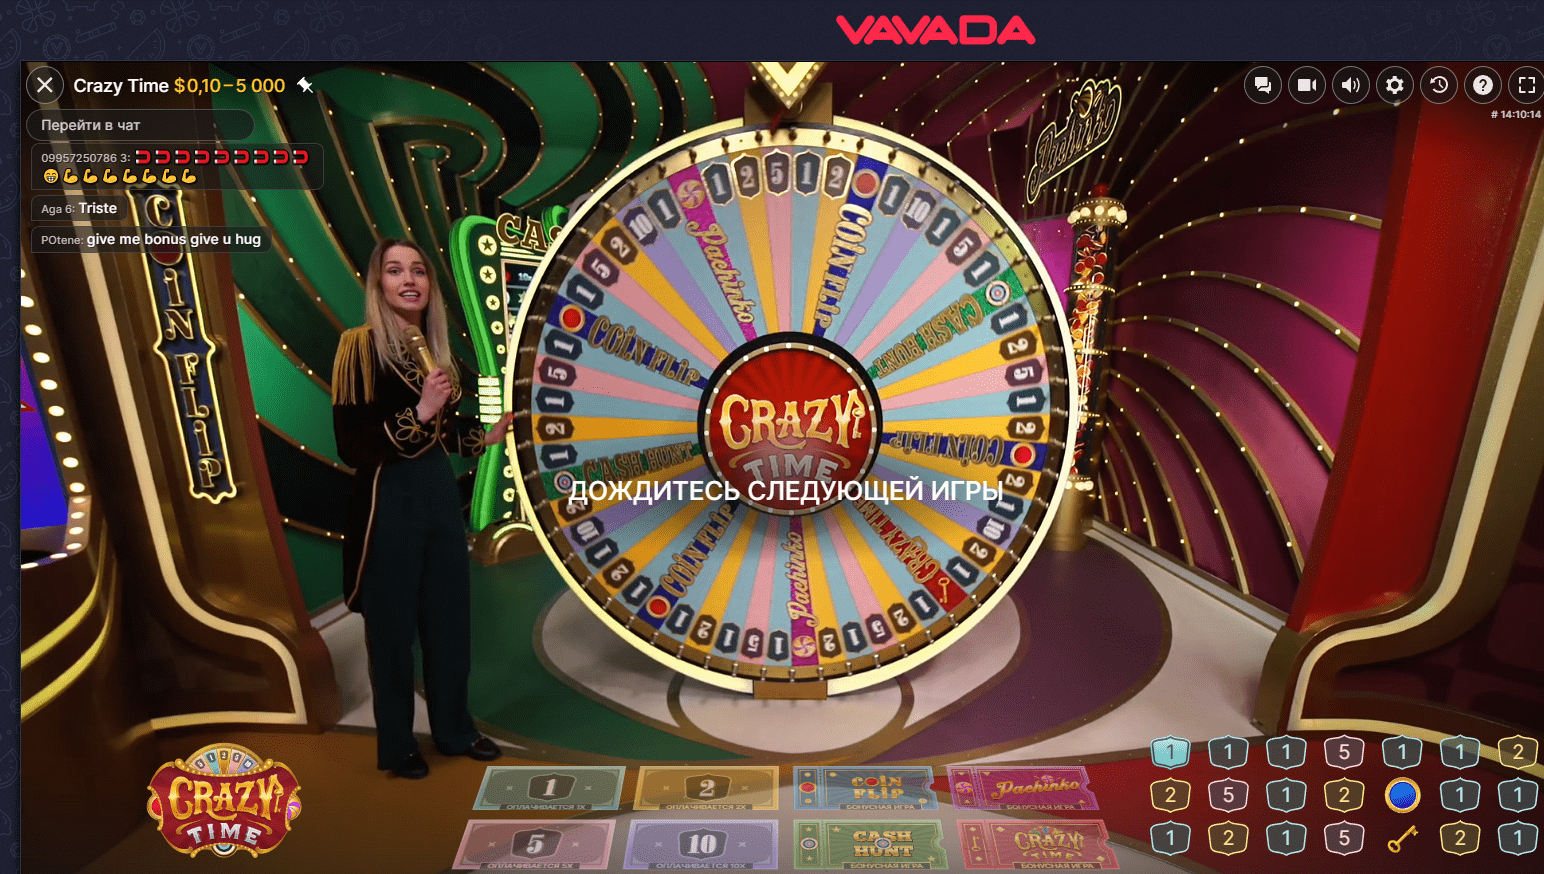 The crazy time game at Vavada Casino